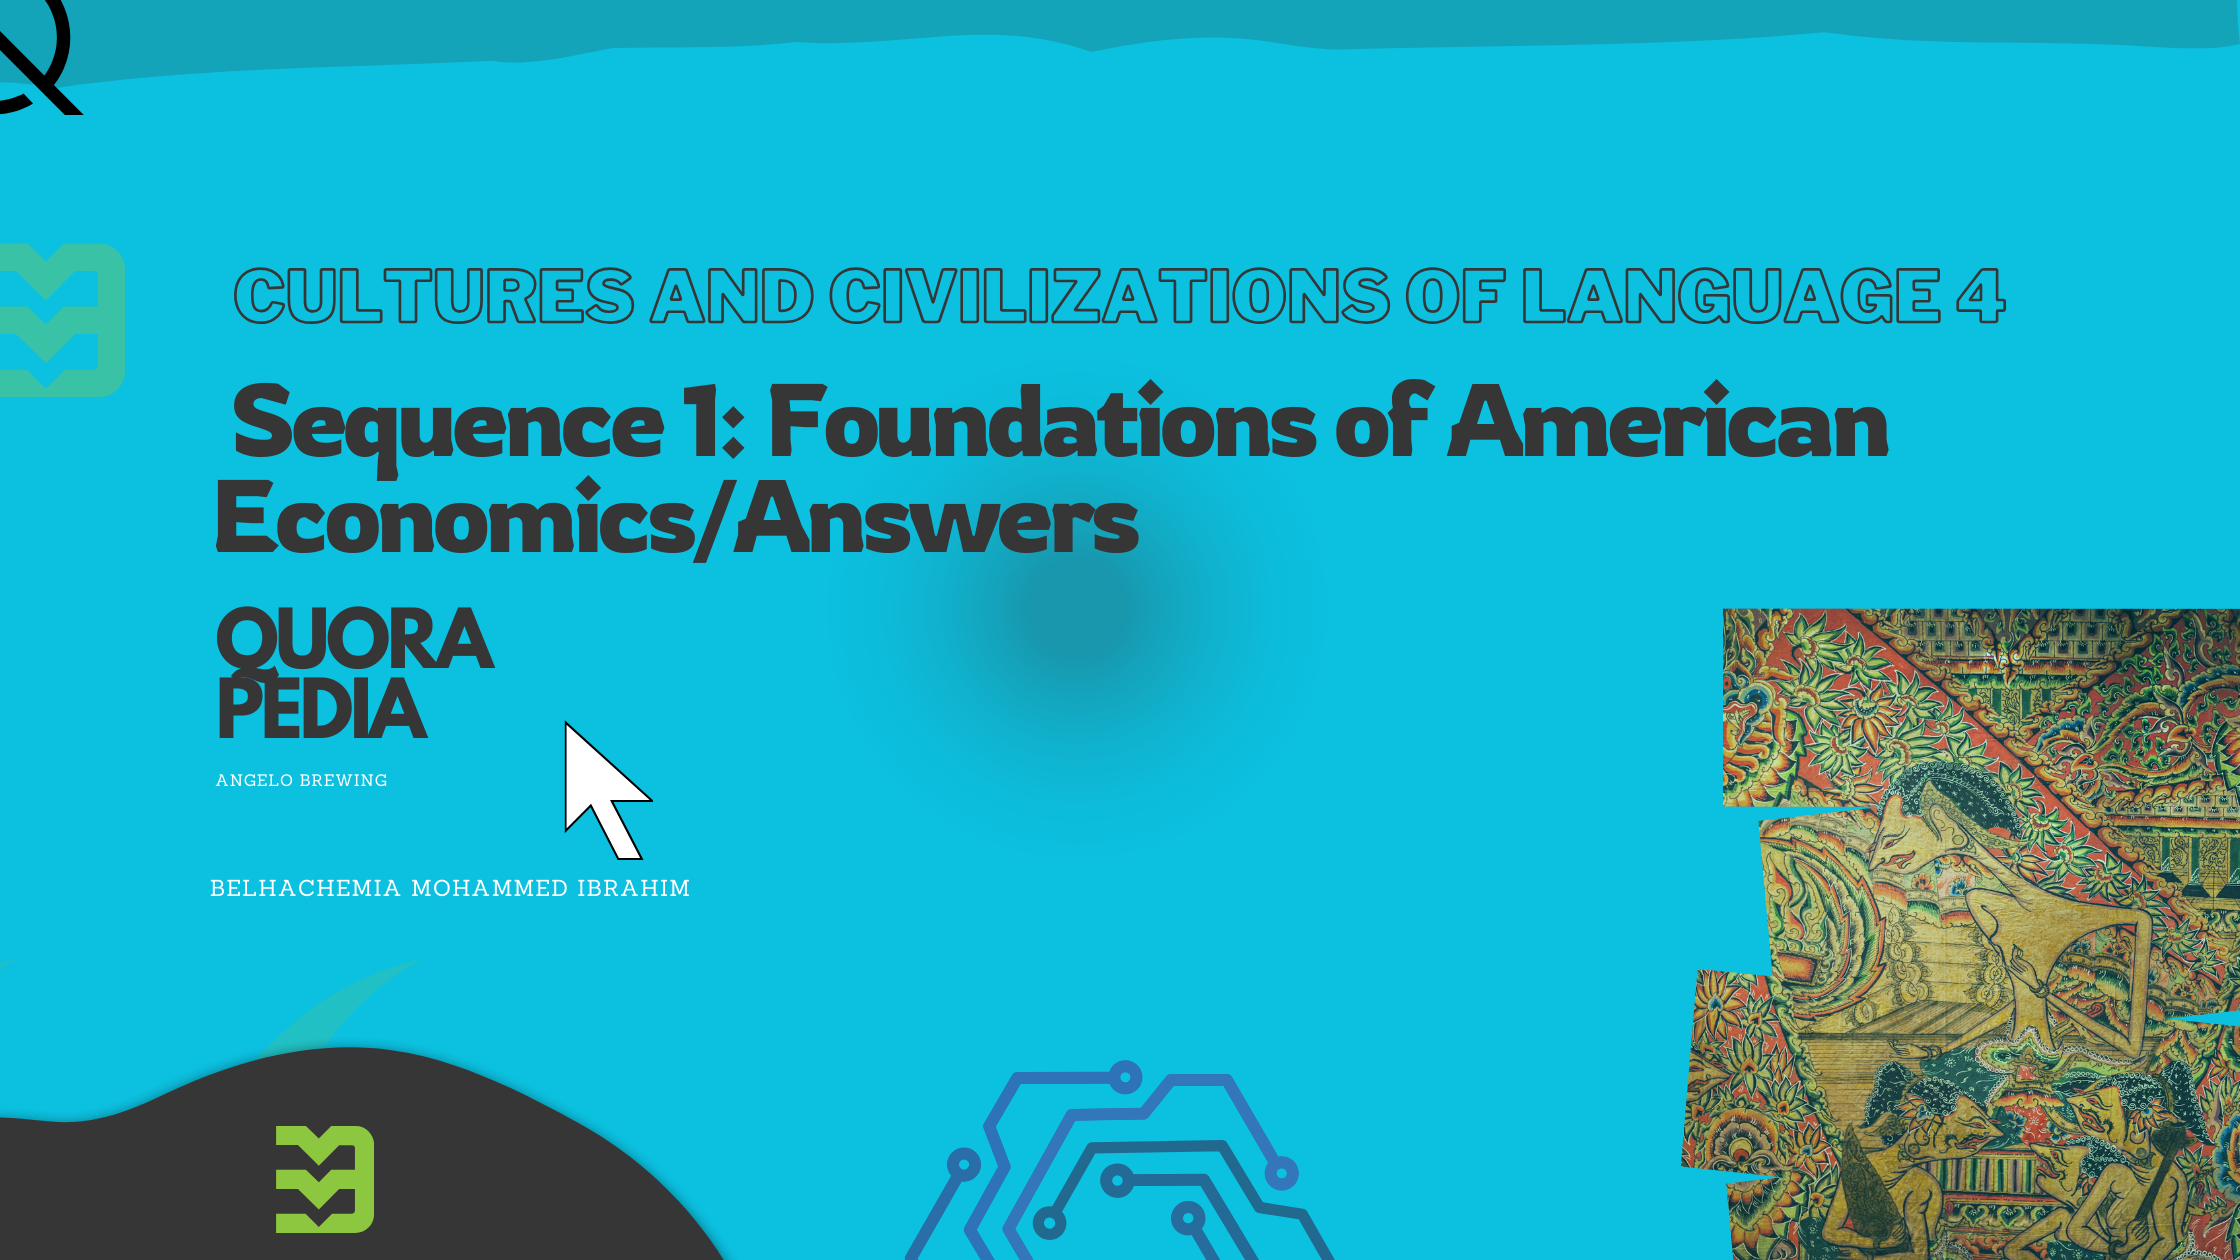 Sequence 1: Foundations of American Economics/Answers